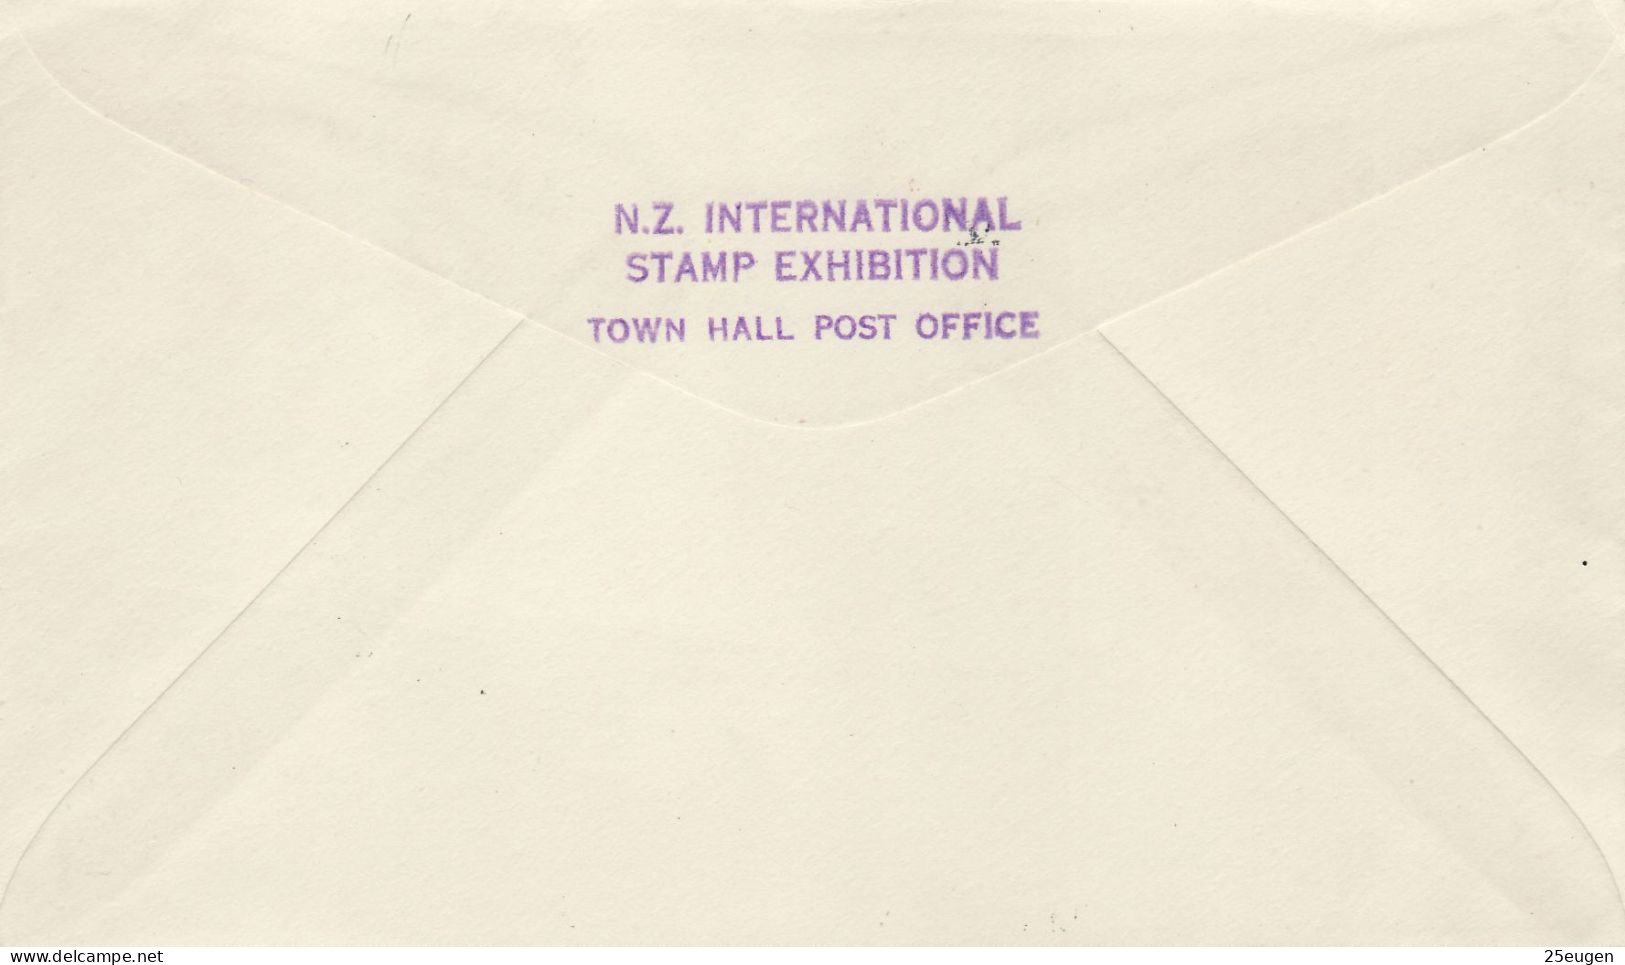 NEW ZEALAND 1955 STAMP EXHIBITION COMMEMORATIVE COVER - Covers & Documents